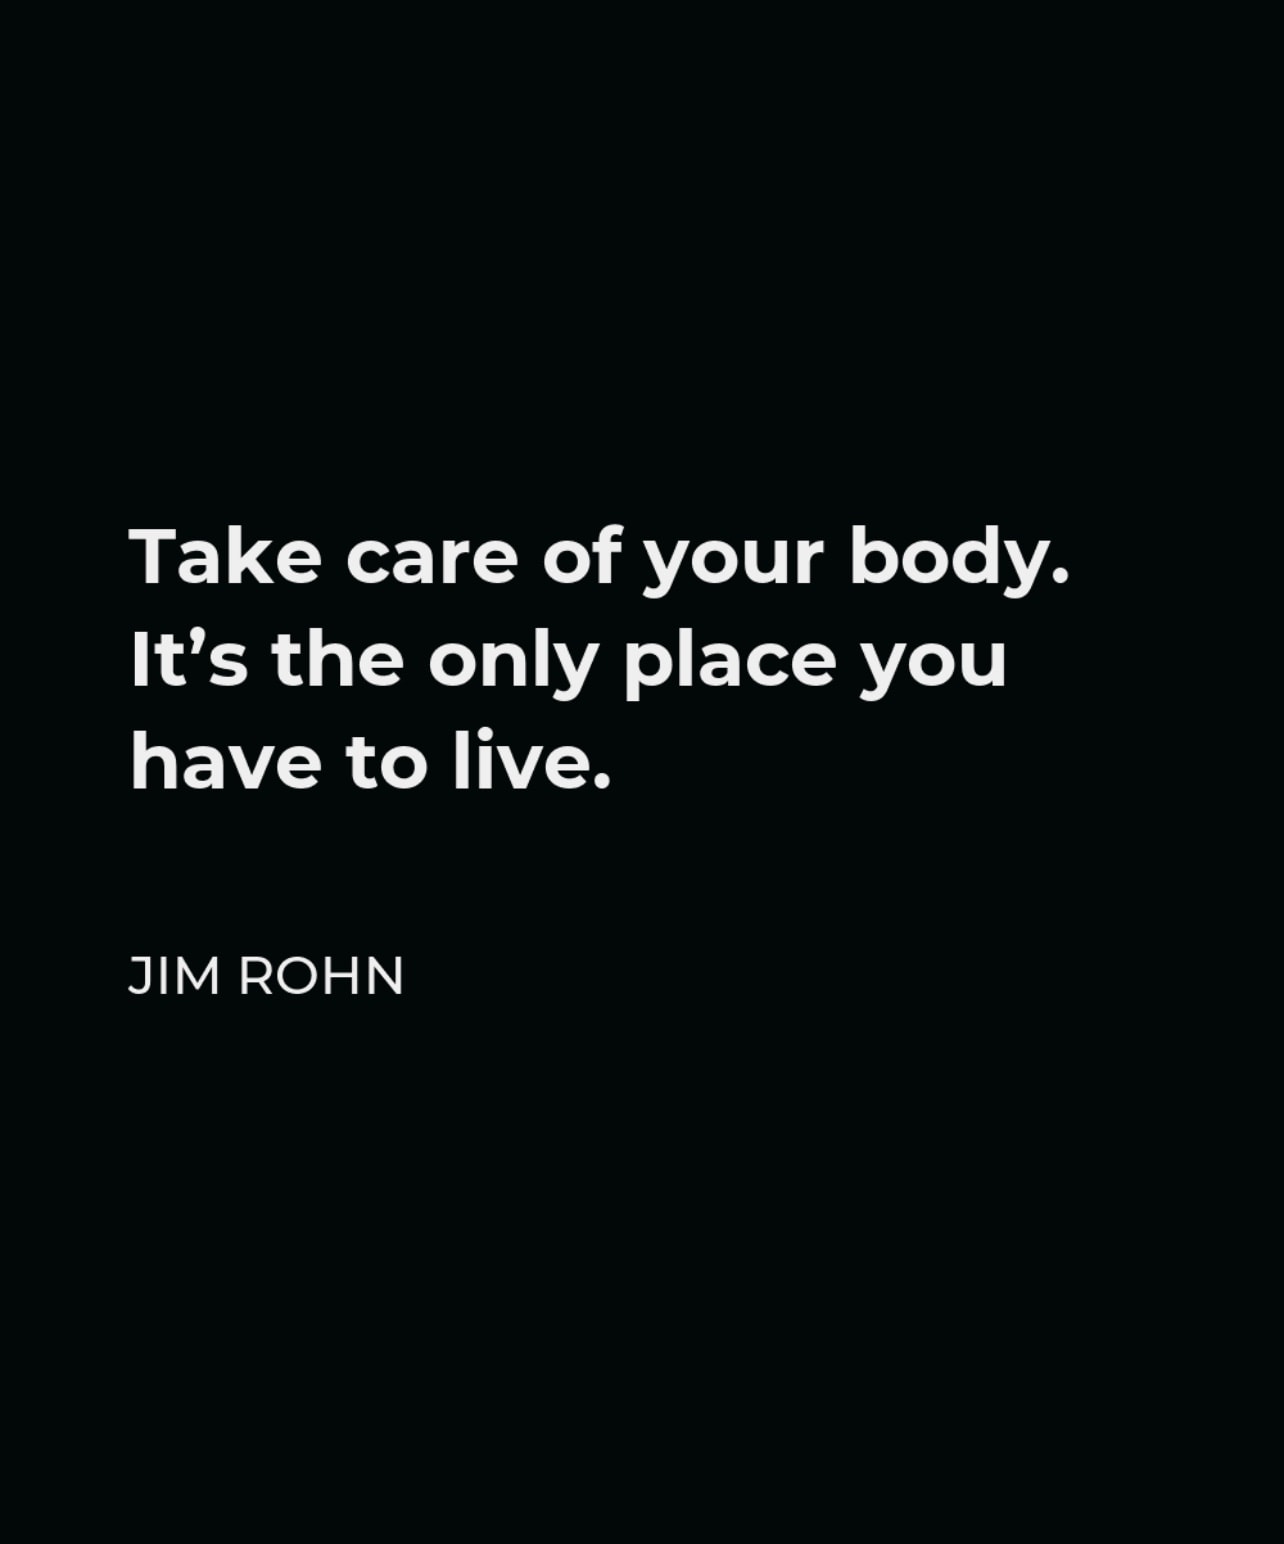 quote by Jim Rohn